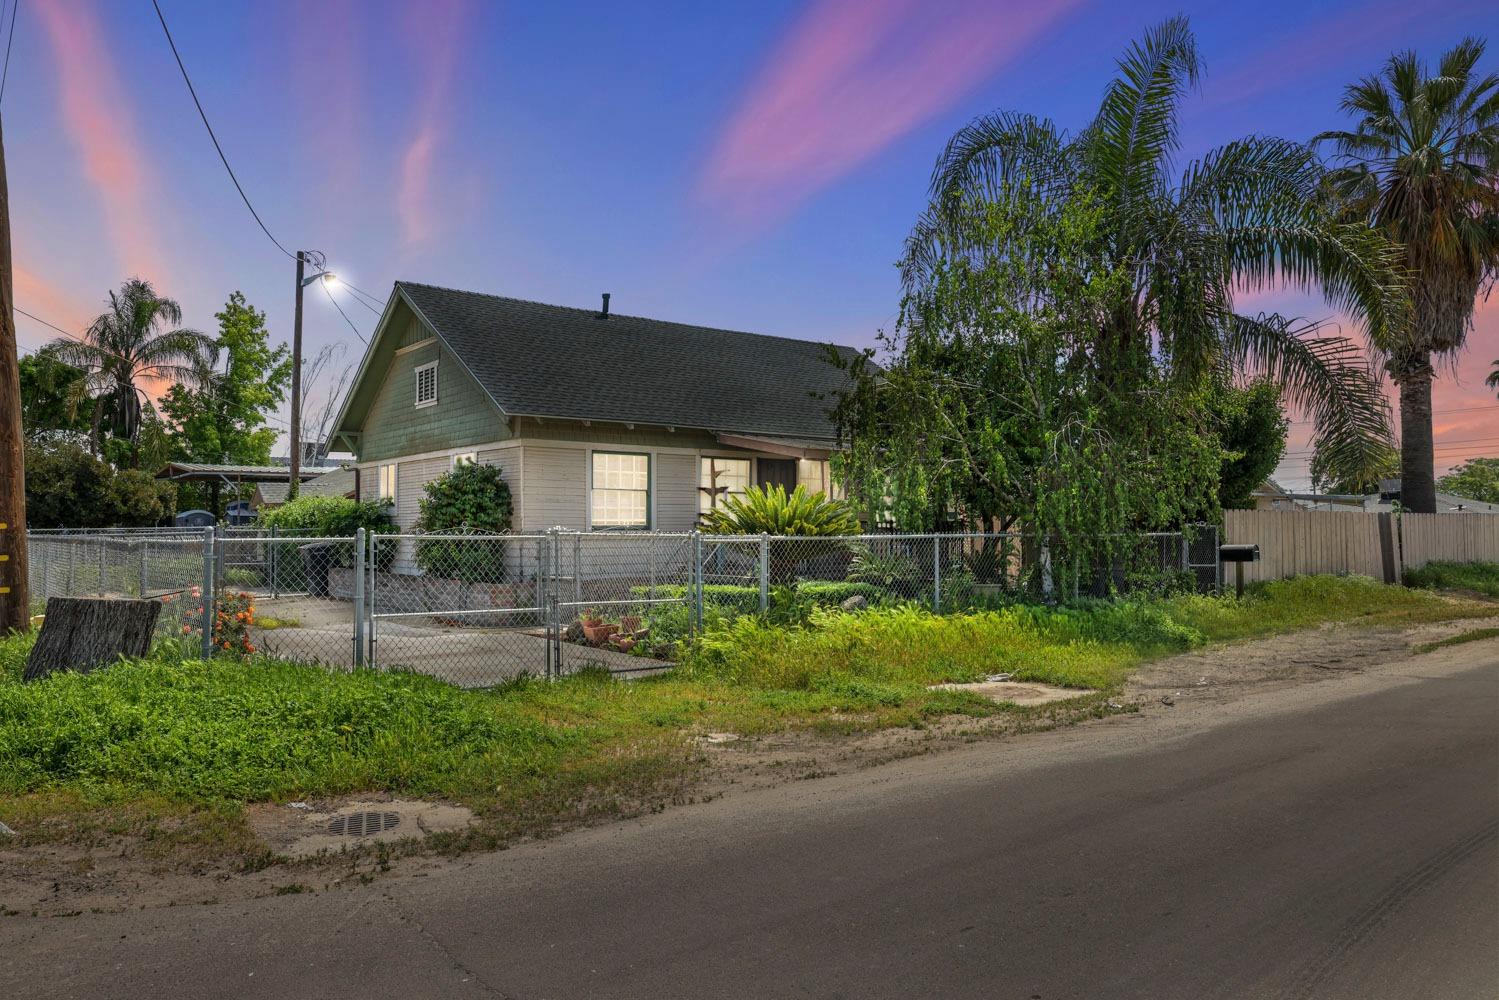 Photo of 1324 Marlow St in Modesto, CA